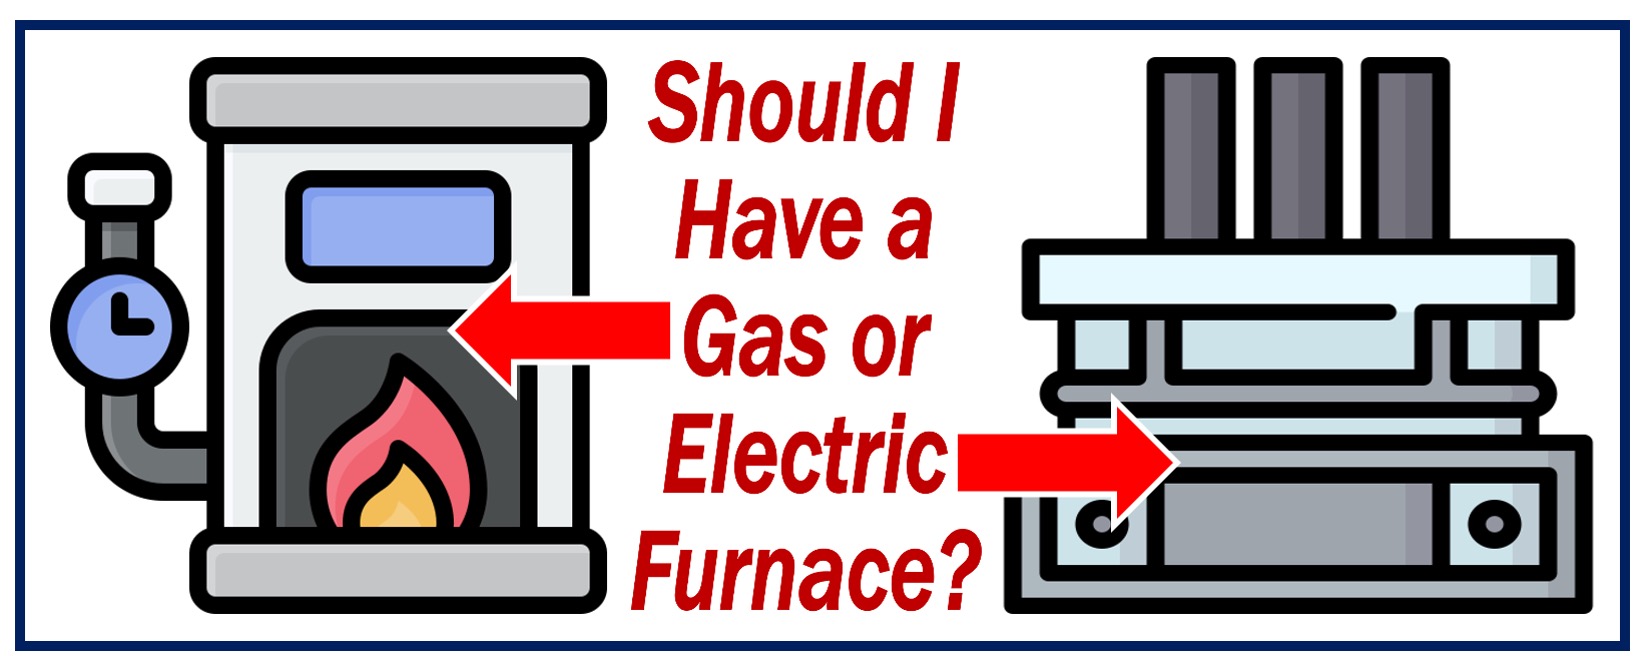 Gas or Electric Furnace - which is best for me?